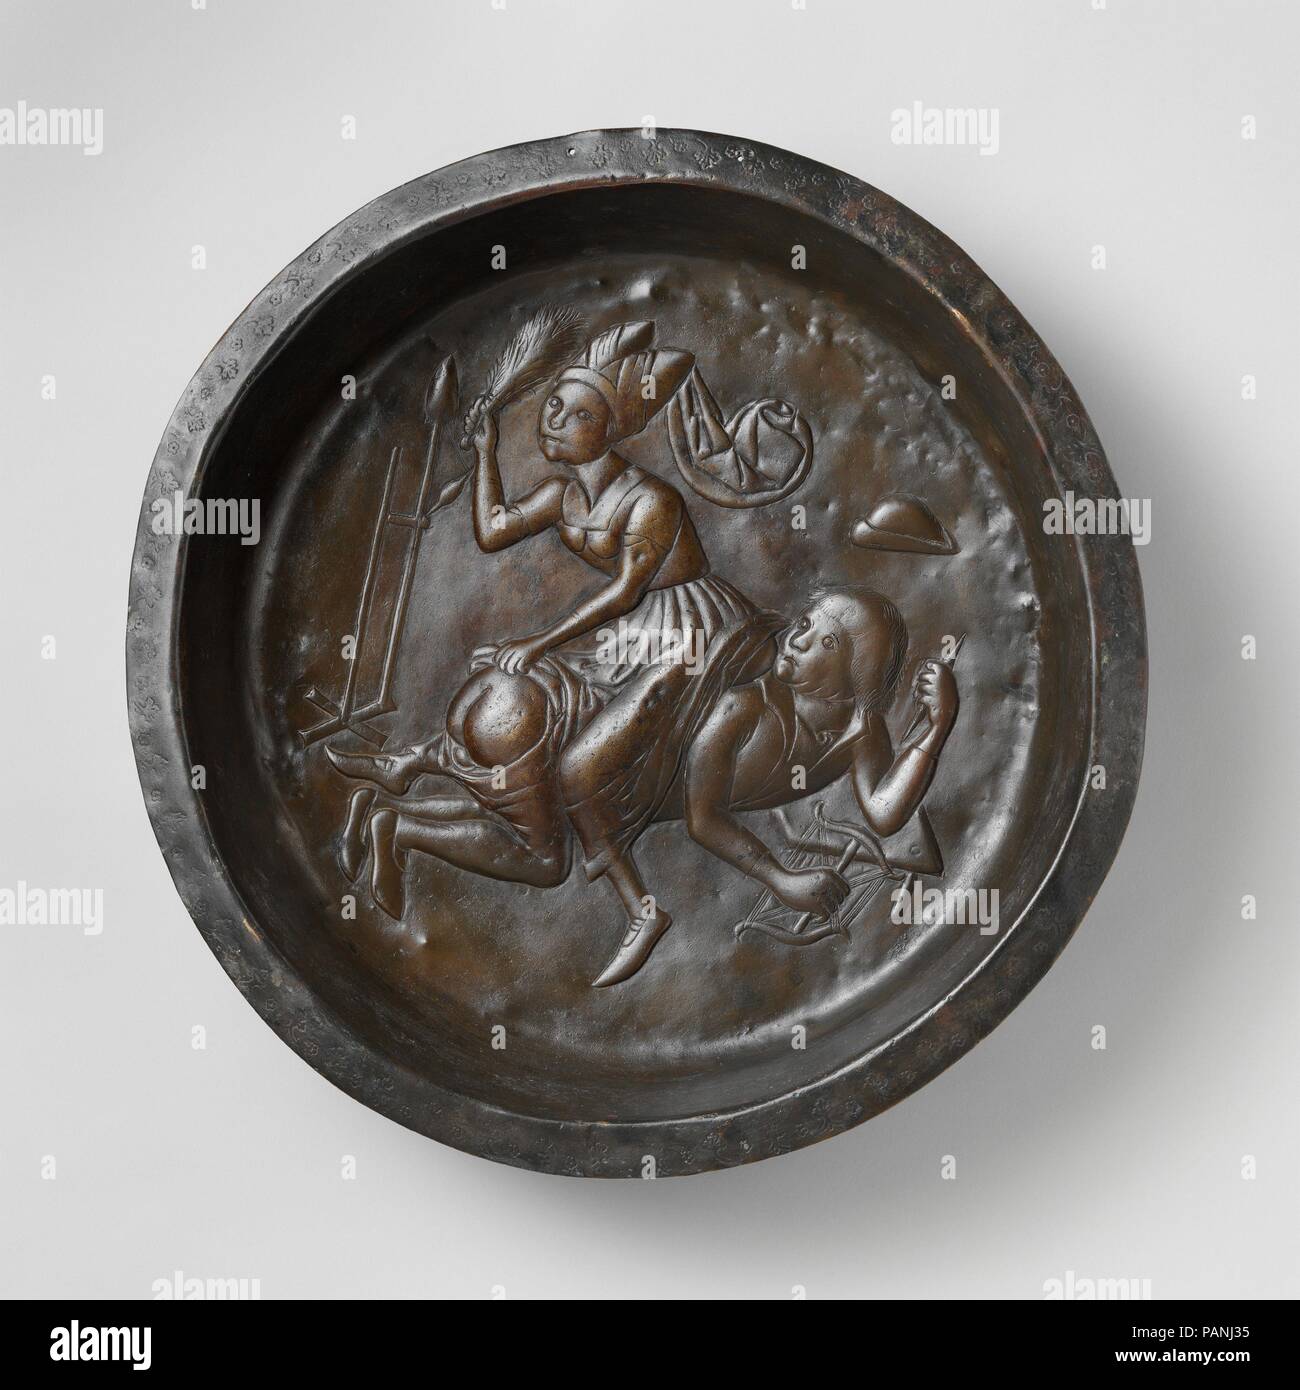 Plate with Wife Beating Husband. Culture: Netherlandish. Dimensions: Overall: 3 7/8 x 20 1/4 in. (9.8 x 51.5 cm). Date: ca. 1480.  The scene on this copper plate is usually thought to represent Aristotle being ridden by Phyllis, but it may be more accurately identified as a general depiction of a woman's tyrannical rule.   Spinning has throughout the ages been considered the work of women. By the time this plate was made, a relatively sophisticated type of spinning wheel had been developed, as seen in an illustration in Das Mittelalterliche Hausbuch of about 1480. The object to the left in thi Stock Photo